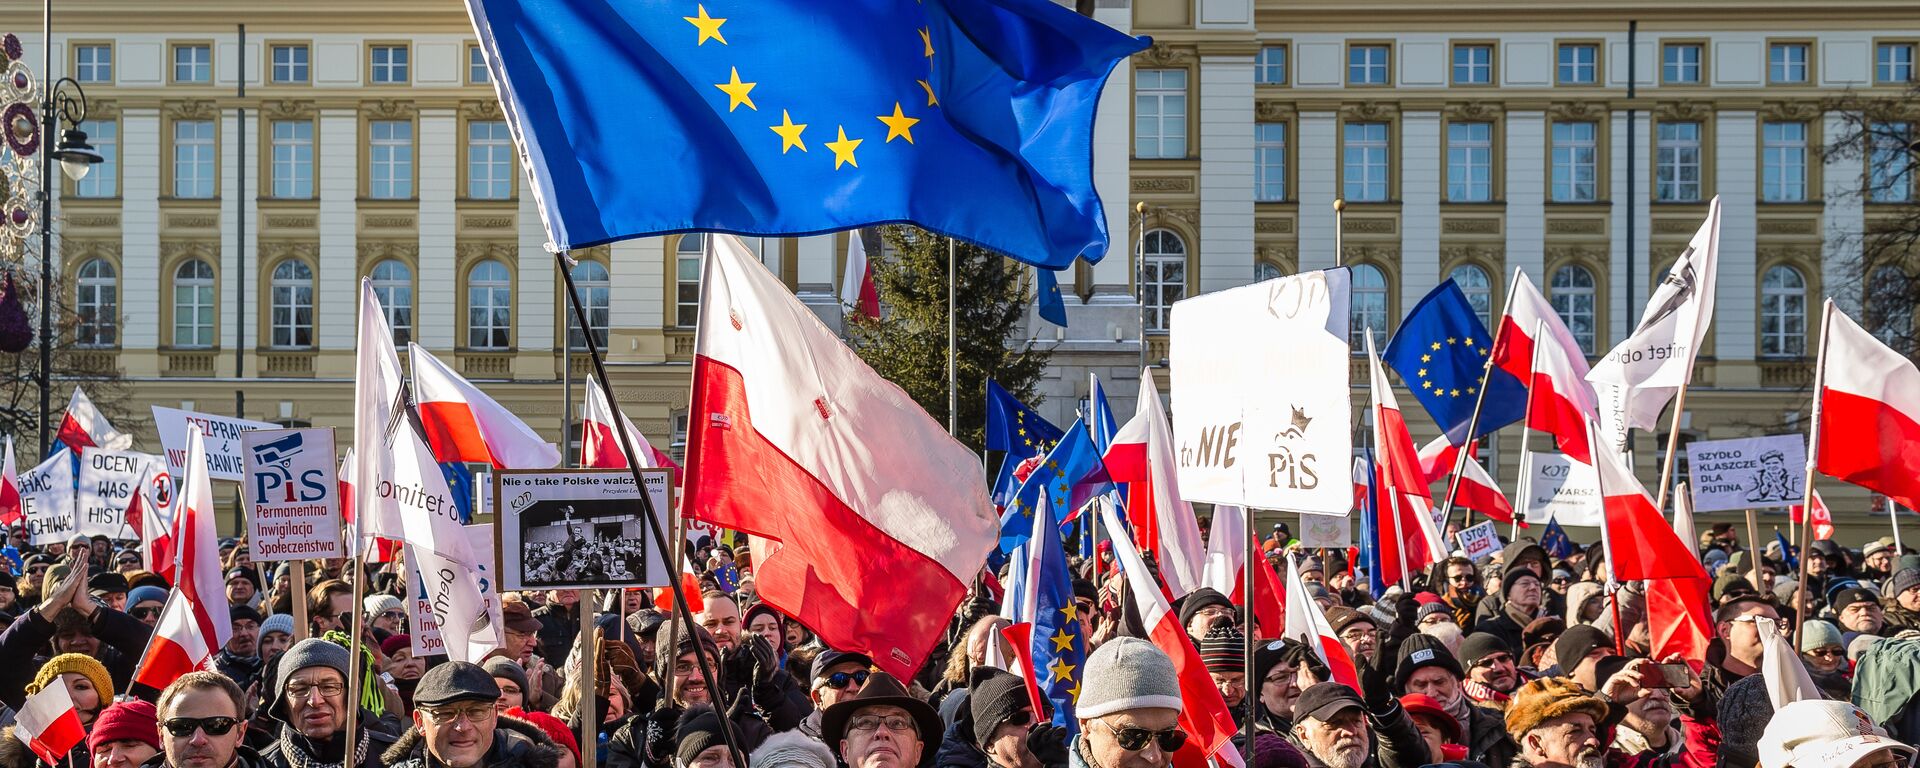 People attend the anti-government demonstration in front of government building in Warsaw, on January 23, 2016. Thousands of people took to the streets in more than 30 cities across Poland on Saturday to defend freedom and protest against the conservative government - Sputnik International, 1920, 19.10.2021